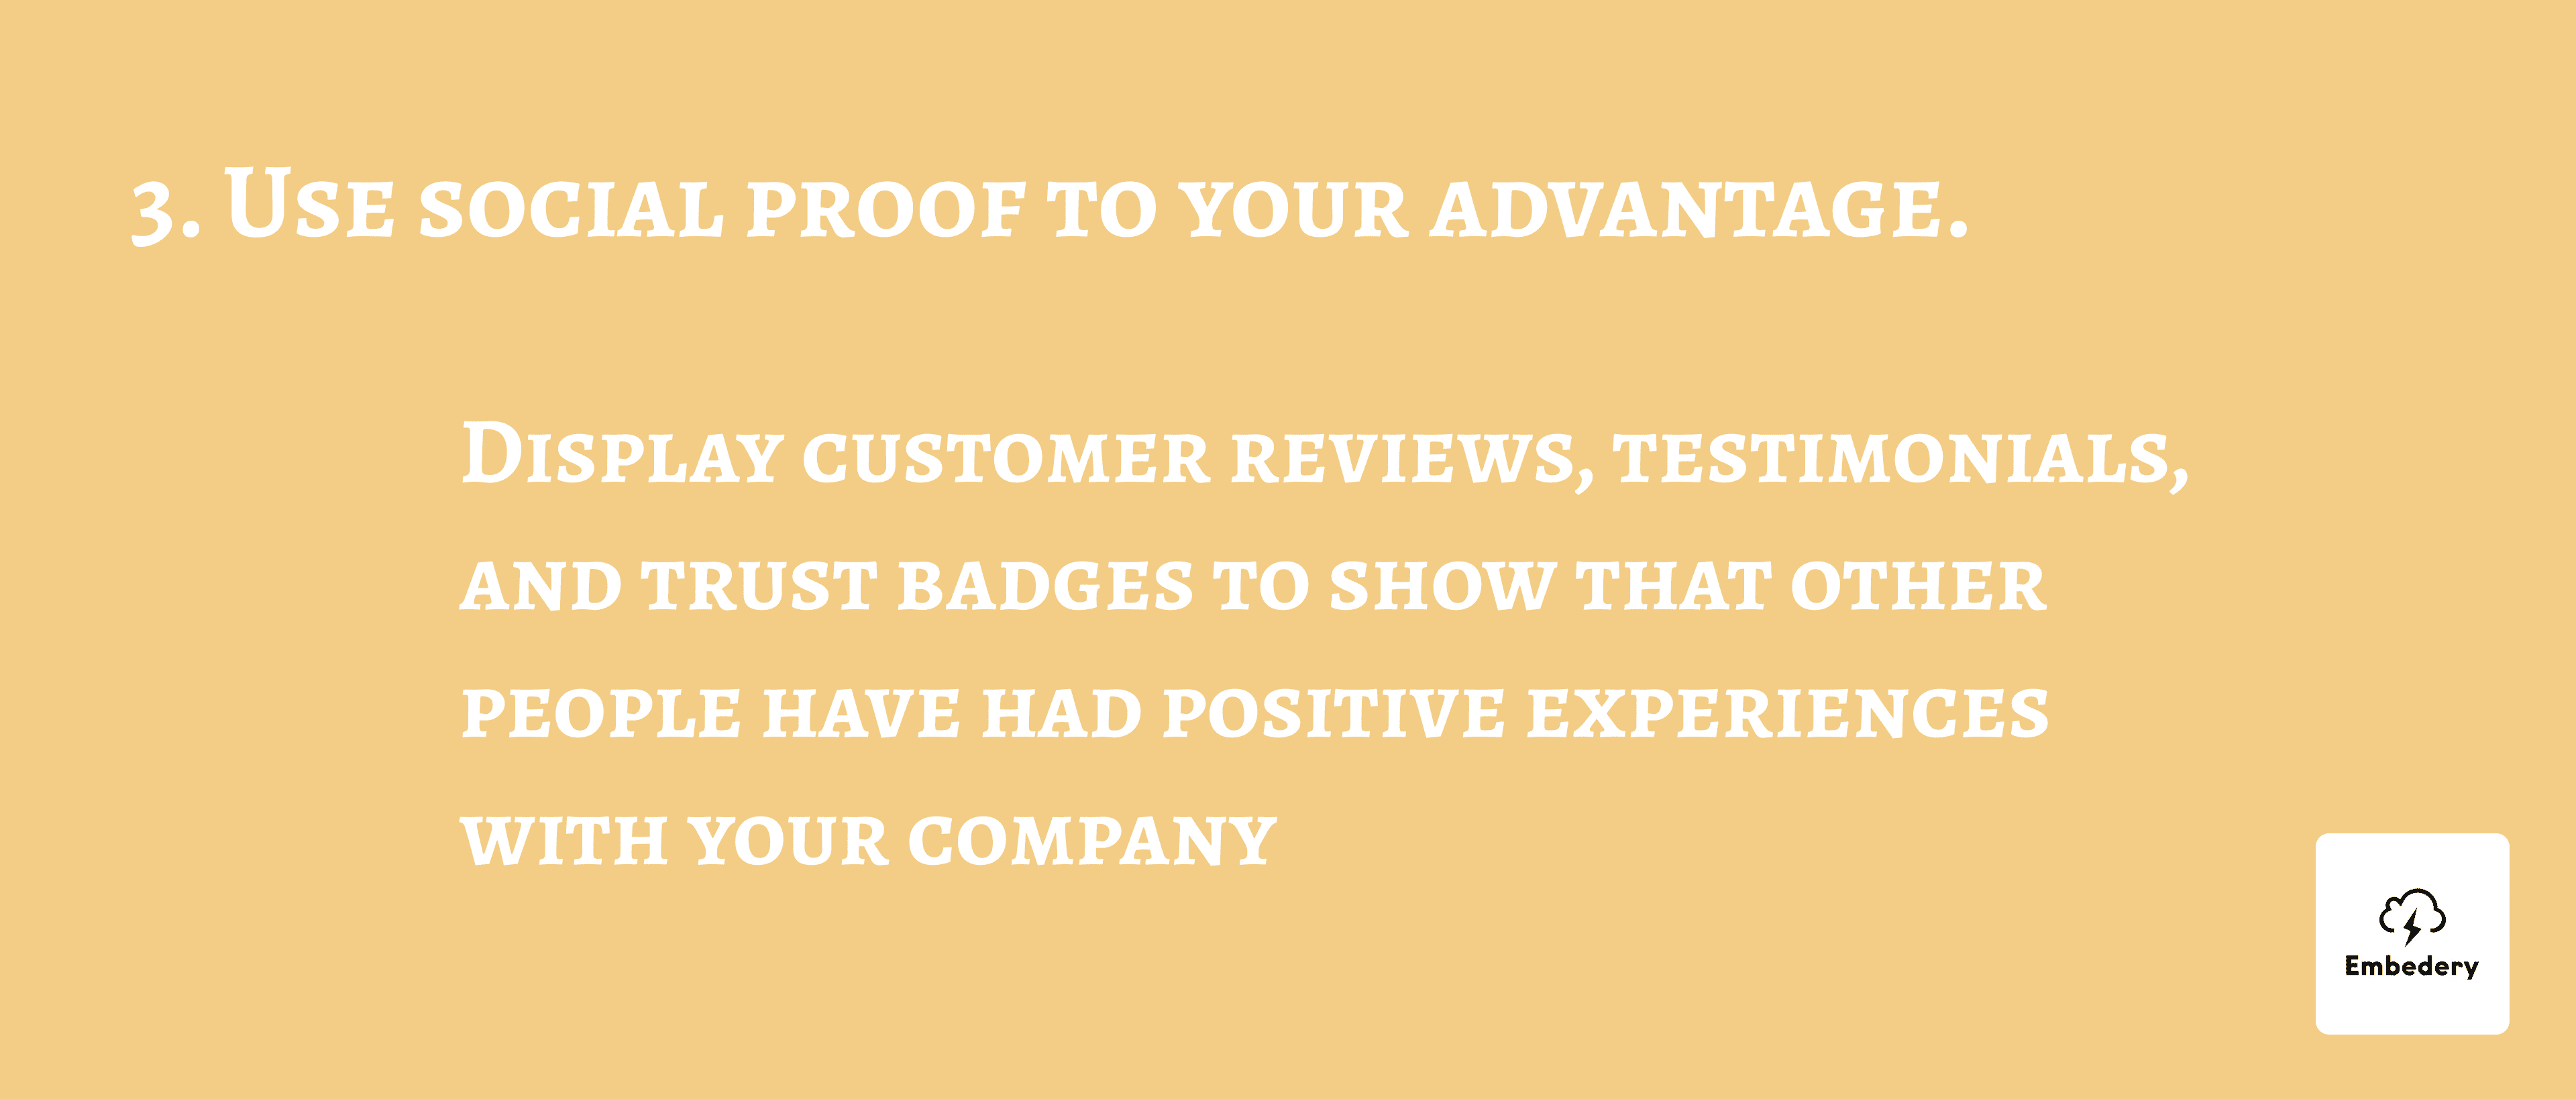 Use social proof to your advantage